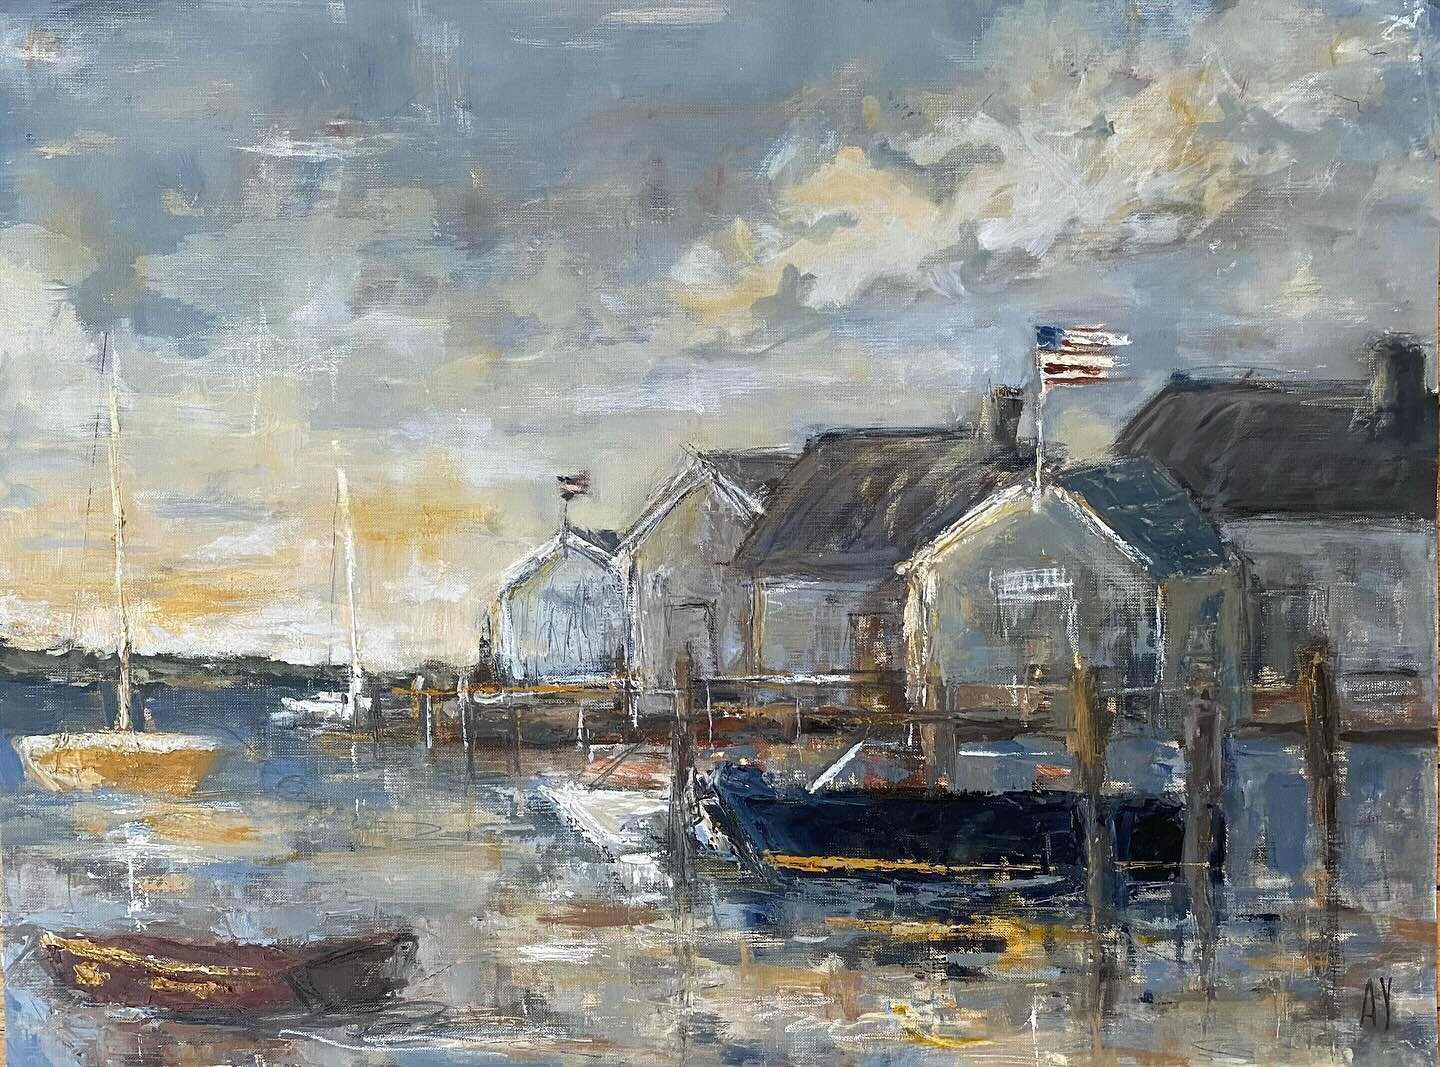 Those paper sketches turned into a finished two finished  paintings! This is &ldquo;North Wind&rdquo; 18x24 Oil and Pencil on paper. DM if interested. Still in the works - &ldquo;South Wind&rdquo;! 
.
.
#nantucket #nantucketisland #nantucketharbor #o